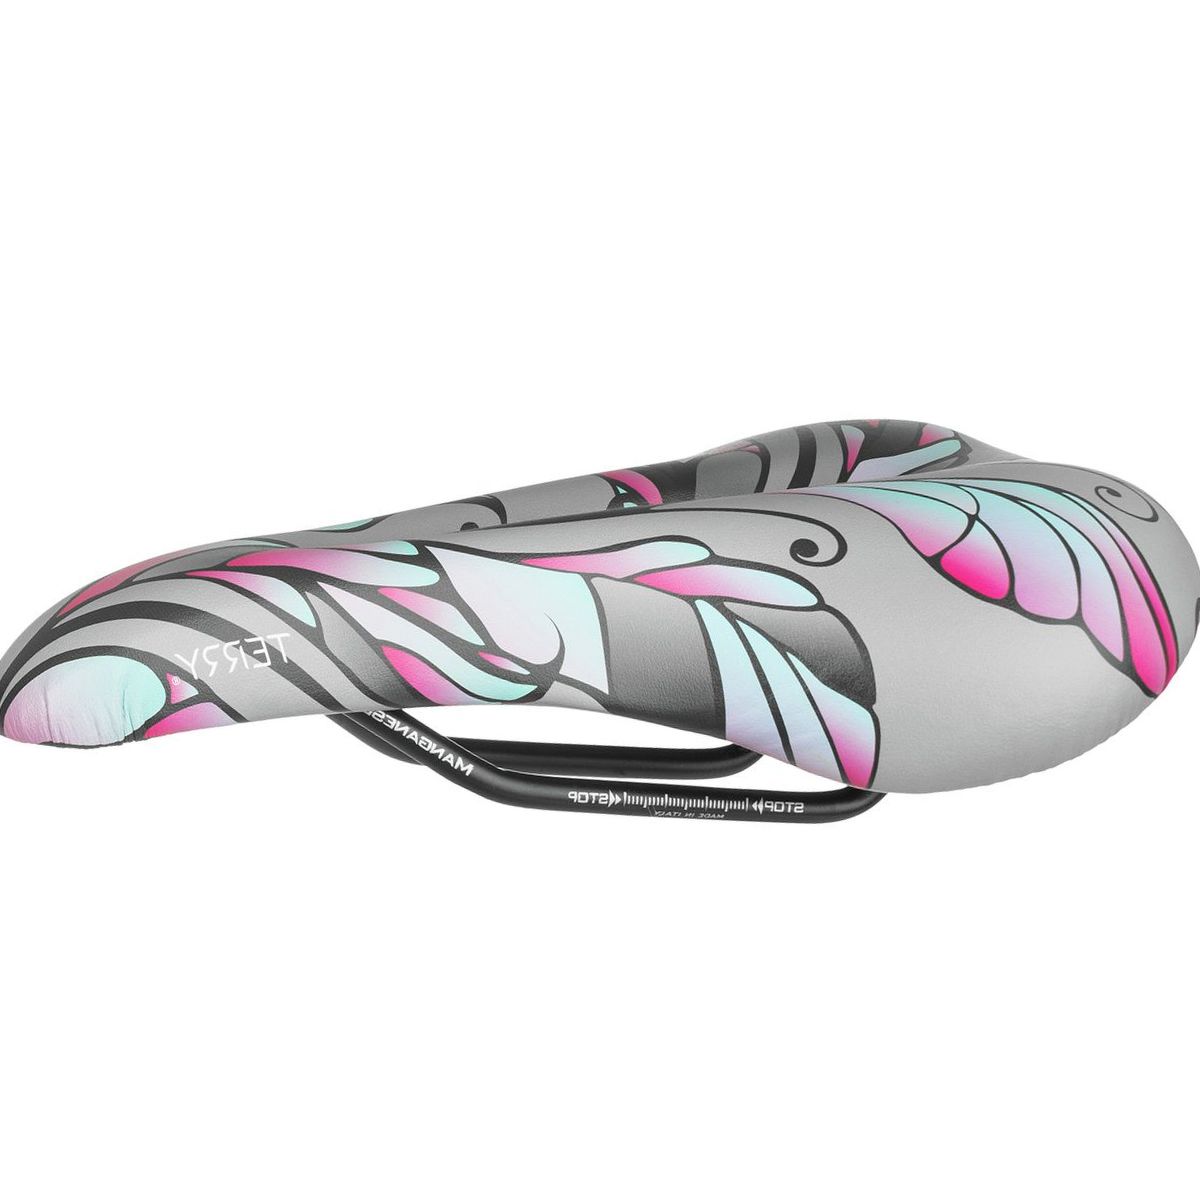 Terry Bicycles Butterfly LTD Saddle - Women's